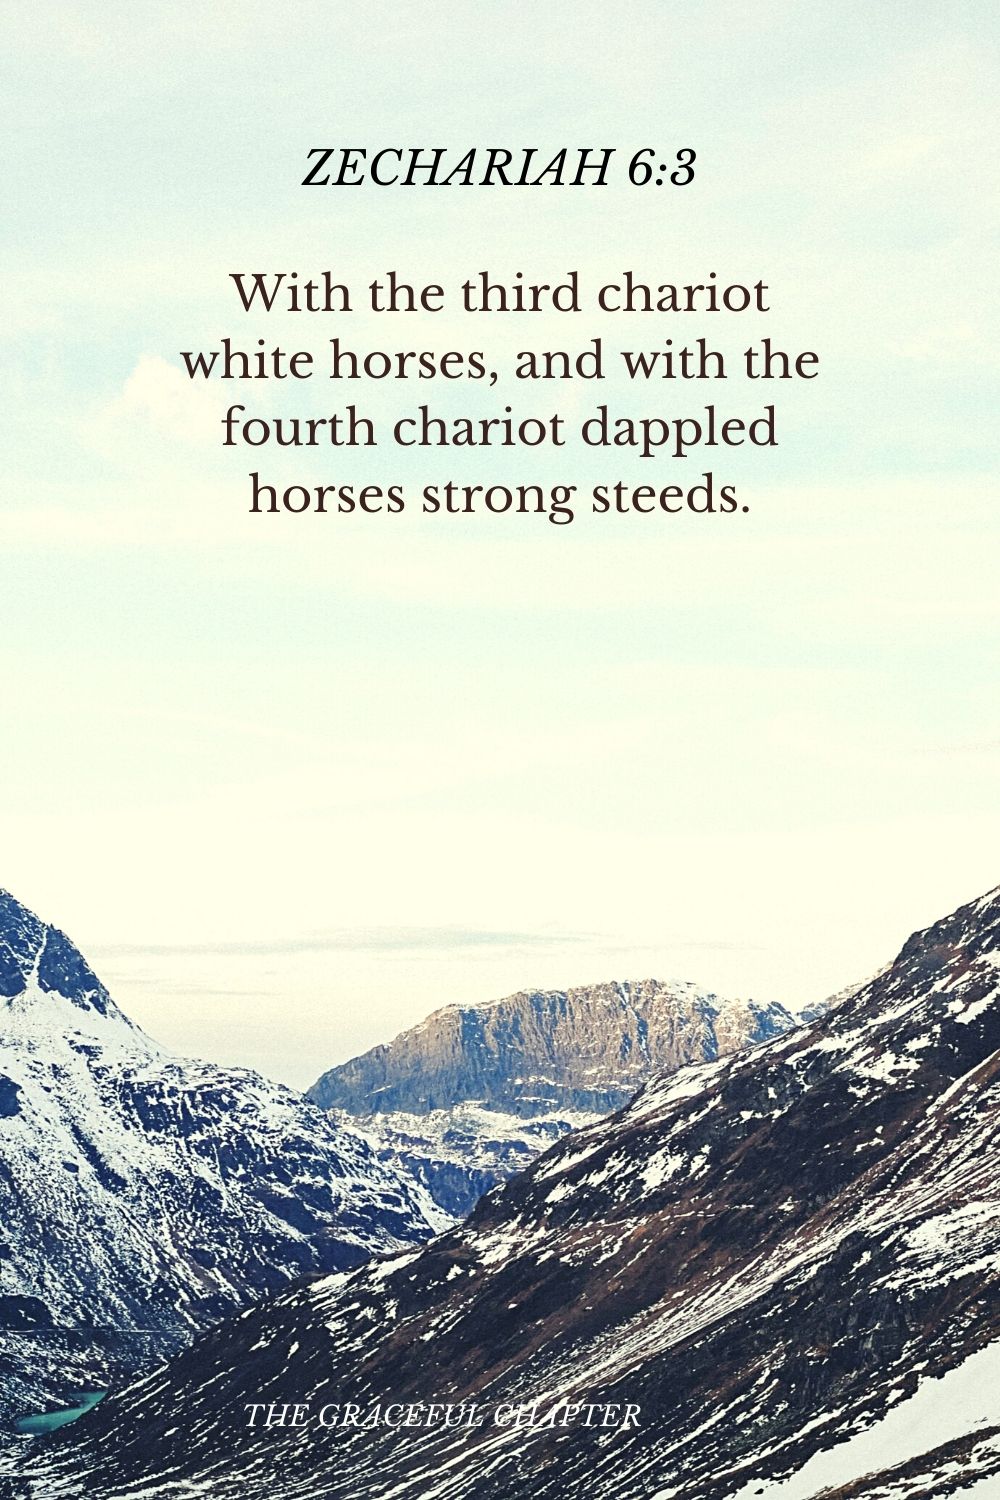 With the third chariot white horses, and with the fourth chariot dappled horses strong steeds. Zechariah 6:3